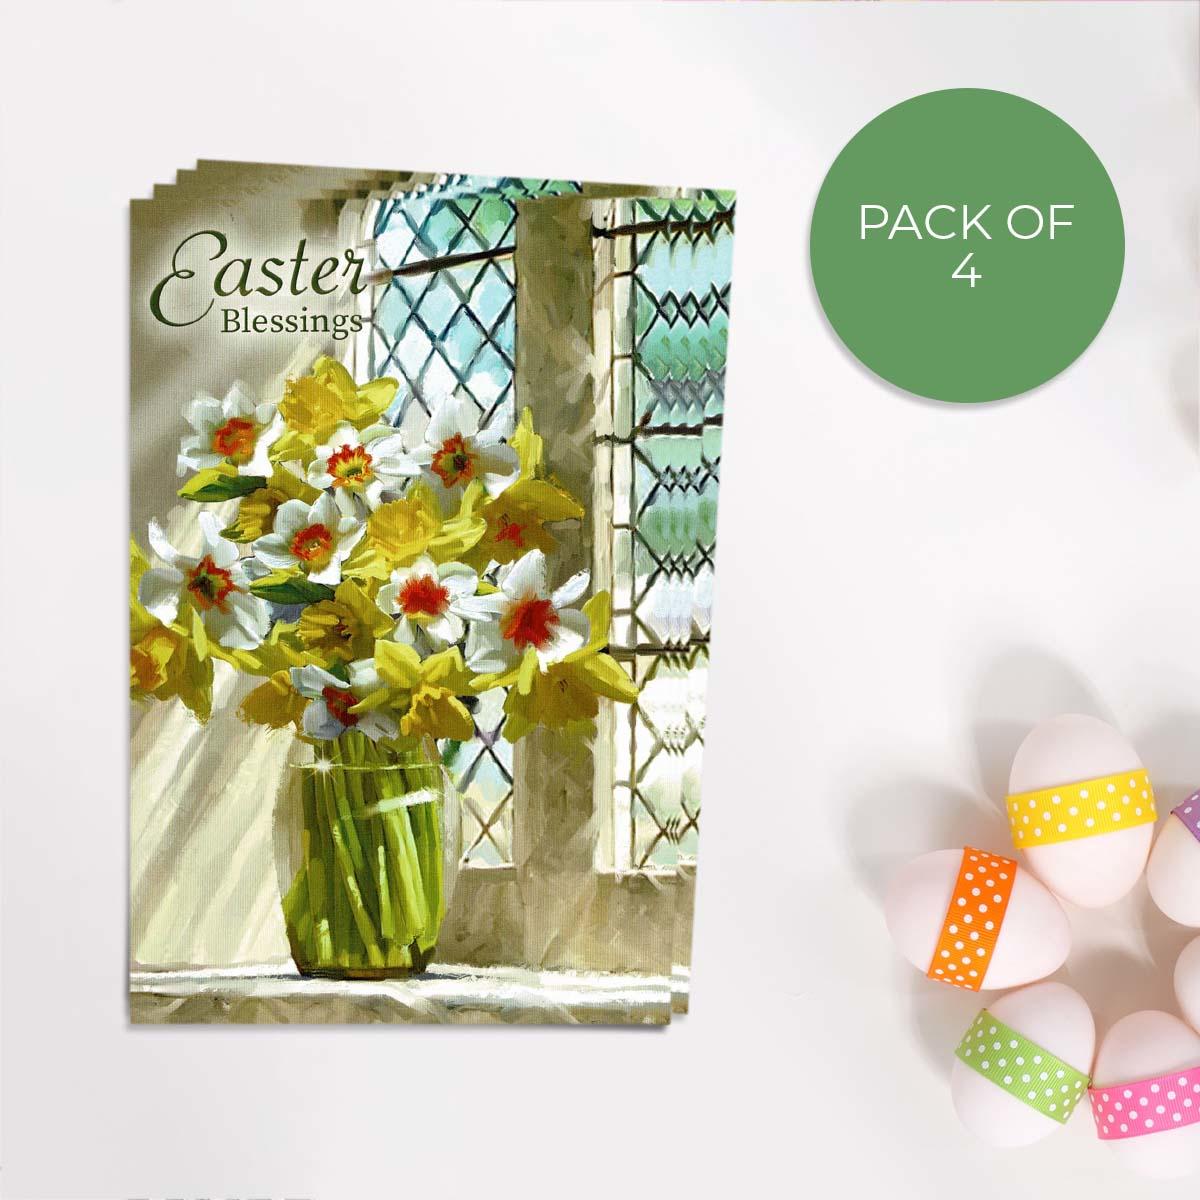 Easter Blessings - Packet Of 4 Cards Front Image